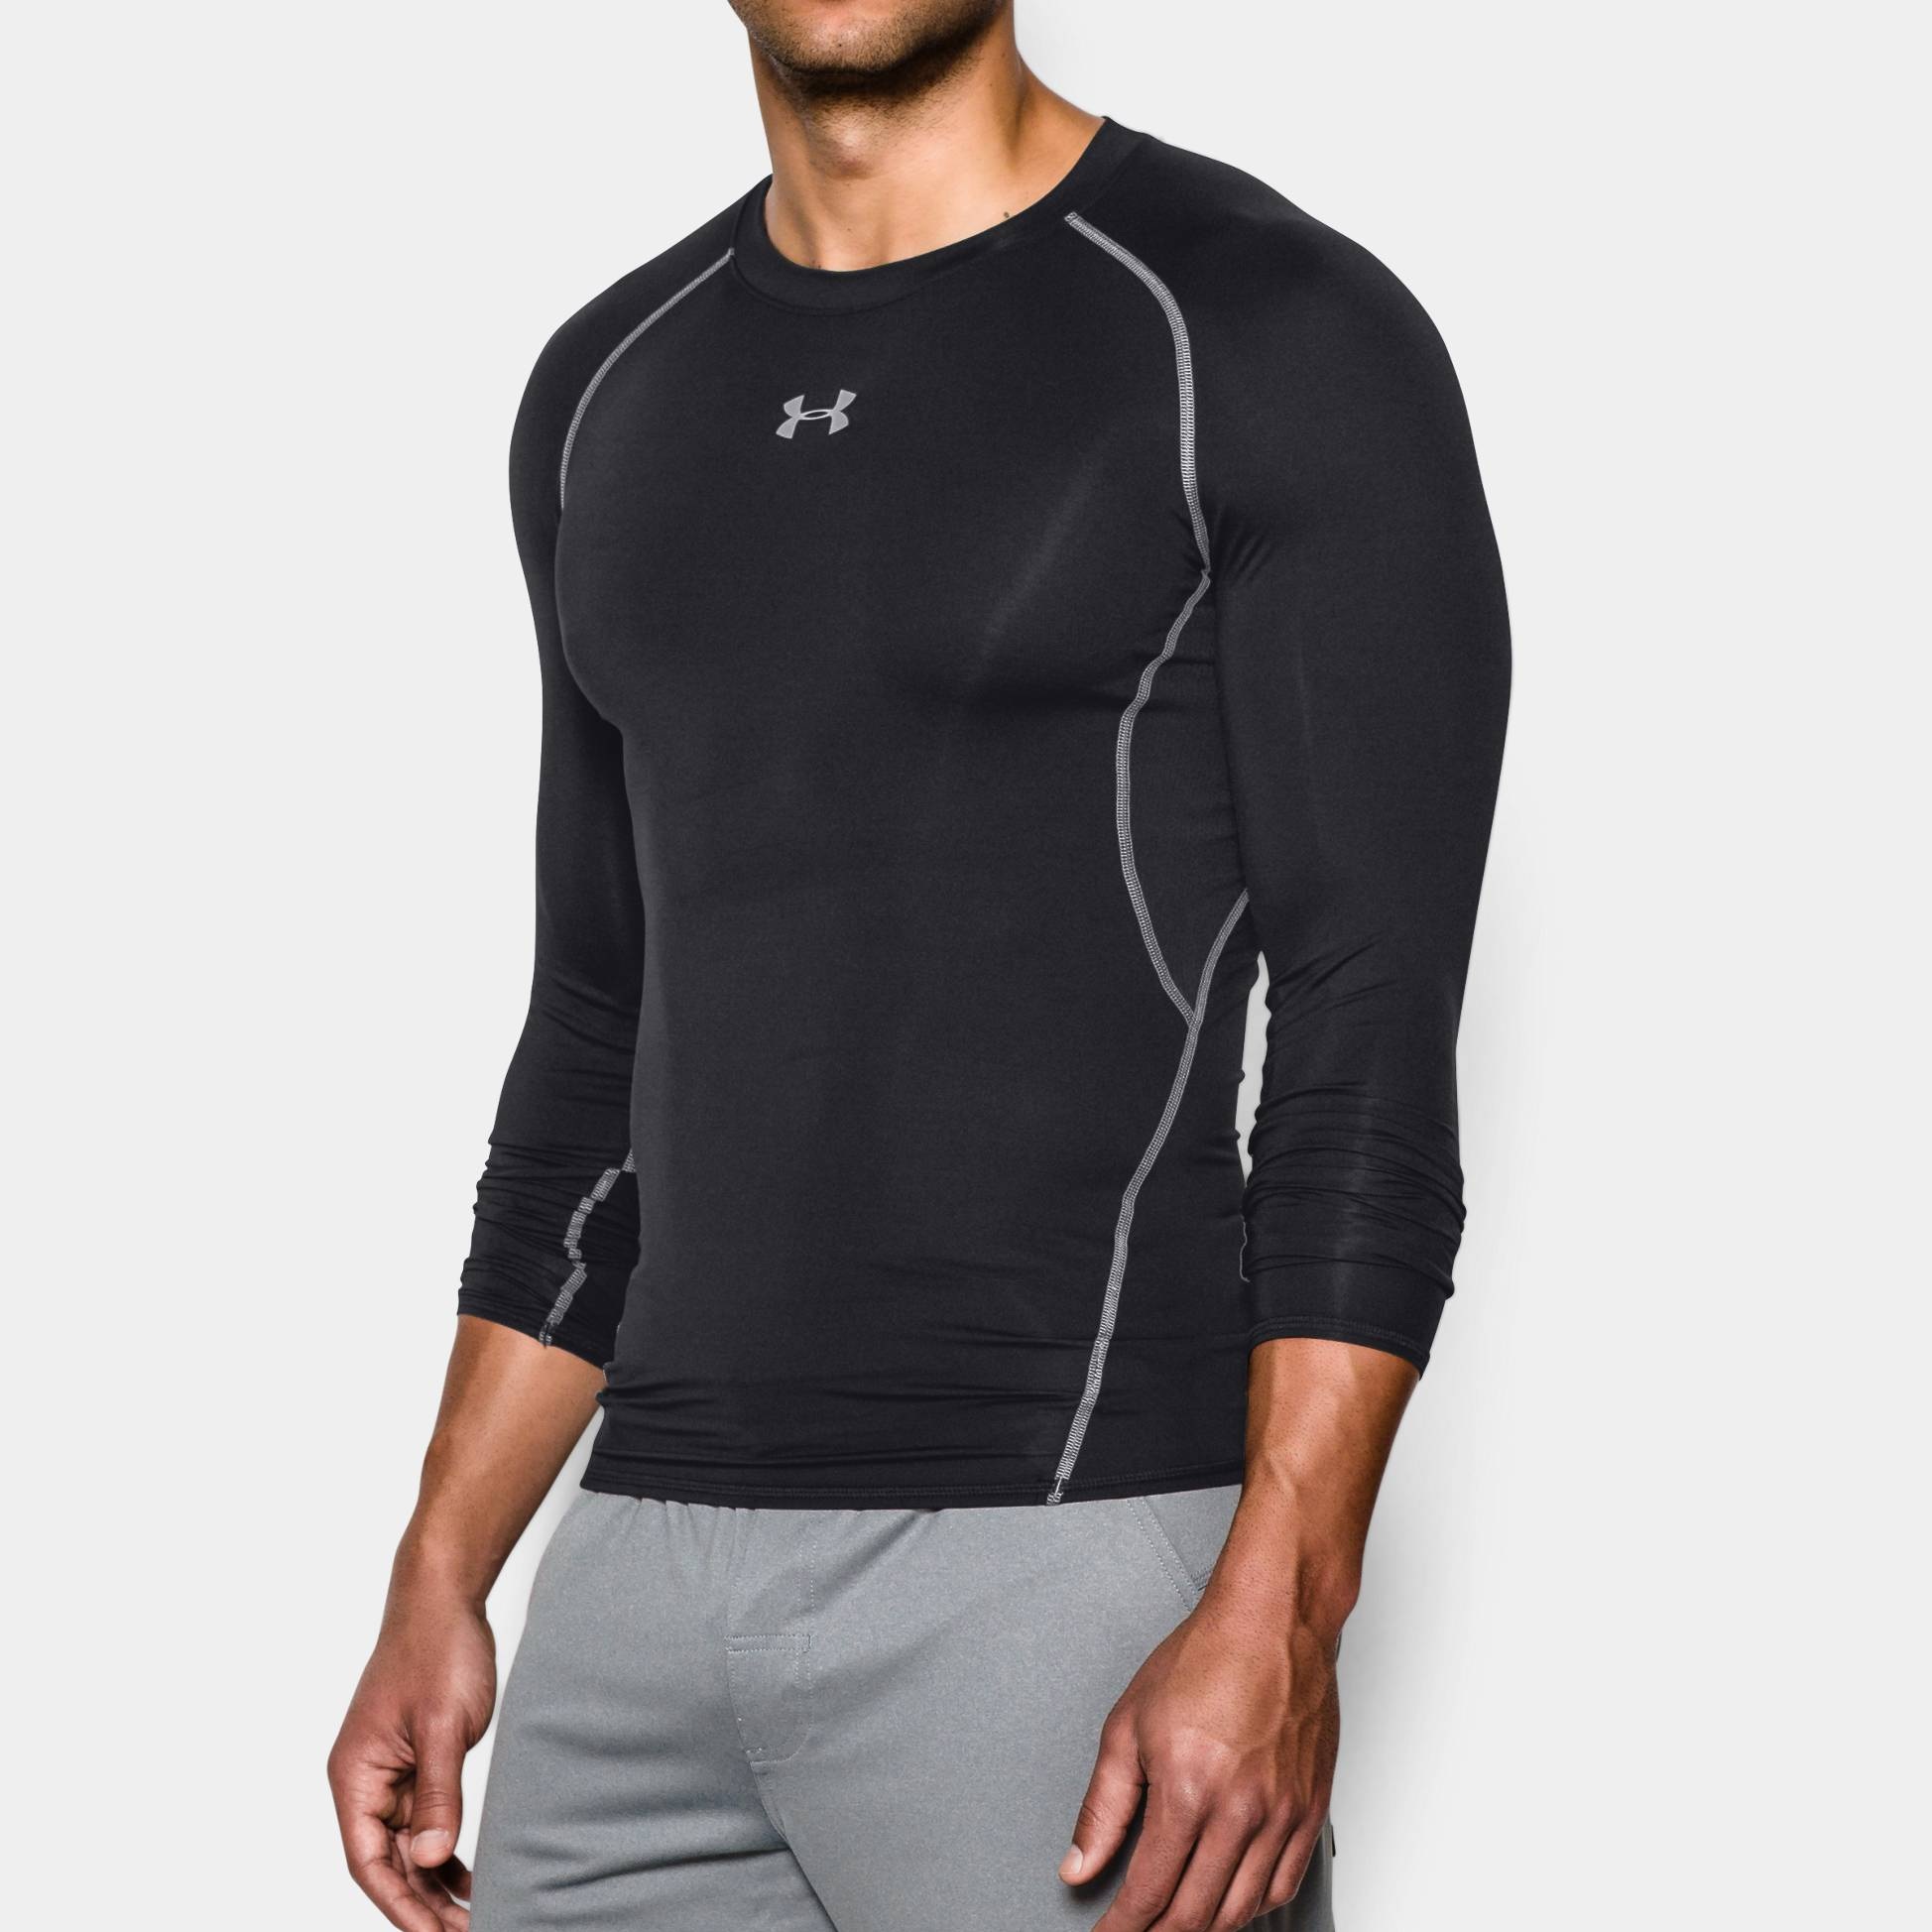 Under armour Long Sleeve Compr. Shirt | Clothing